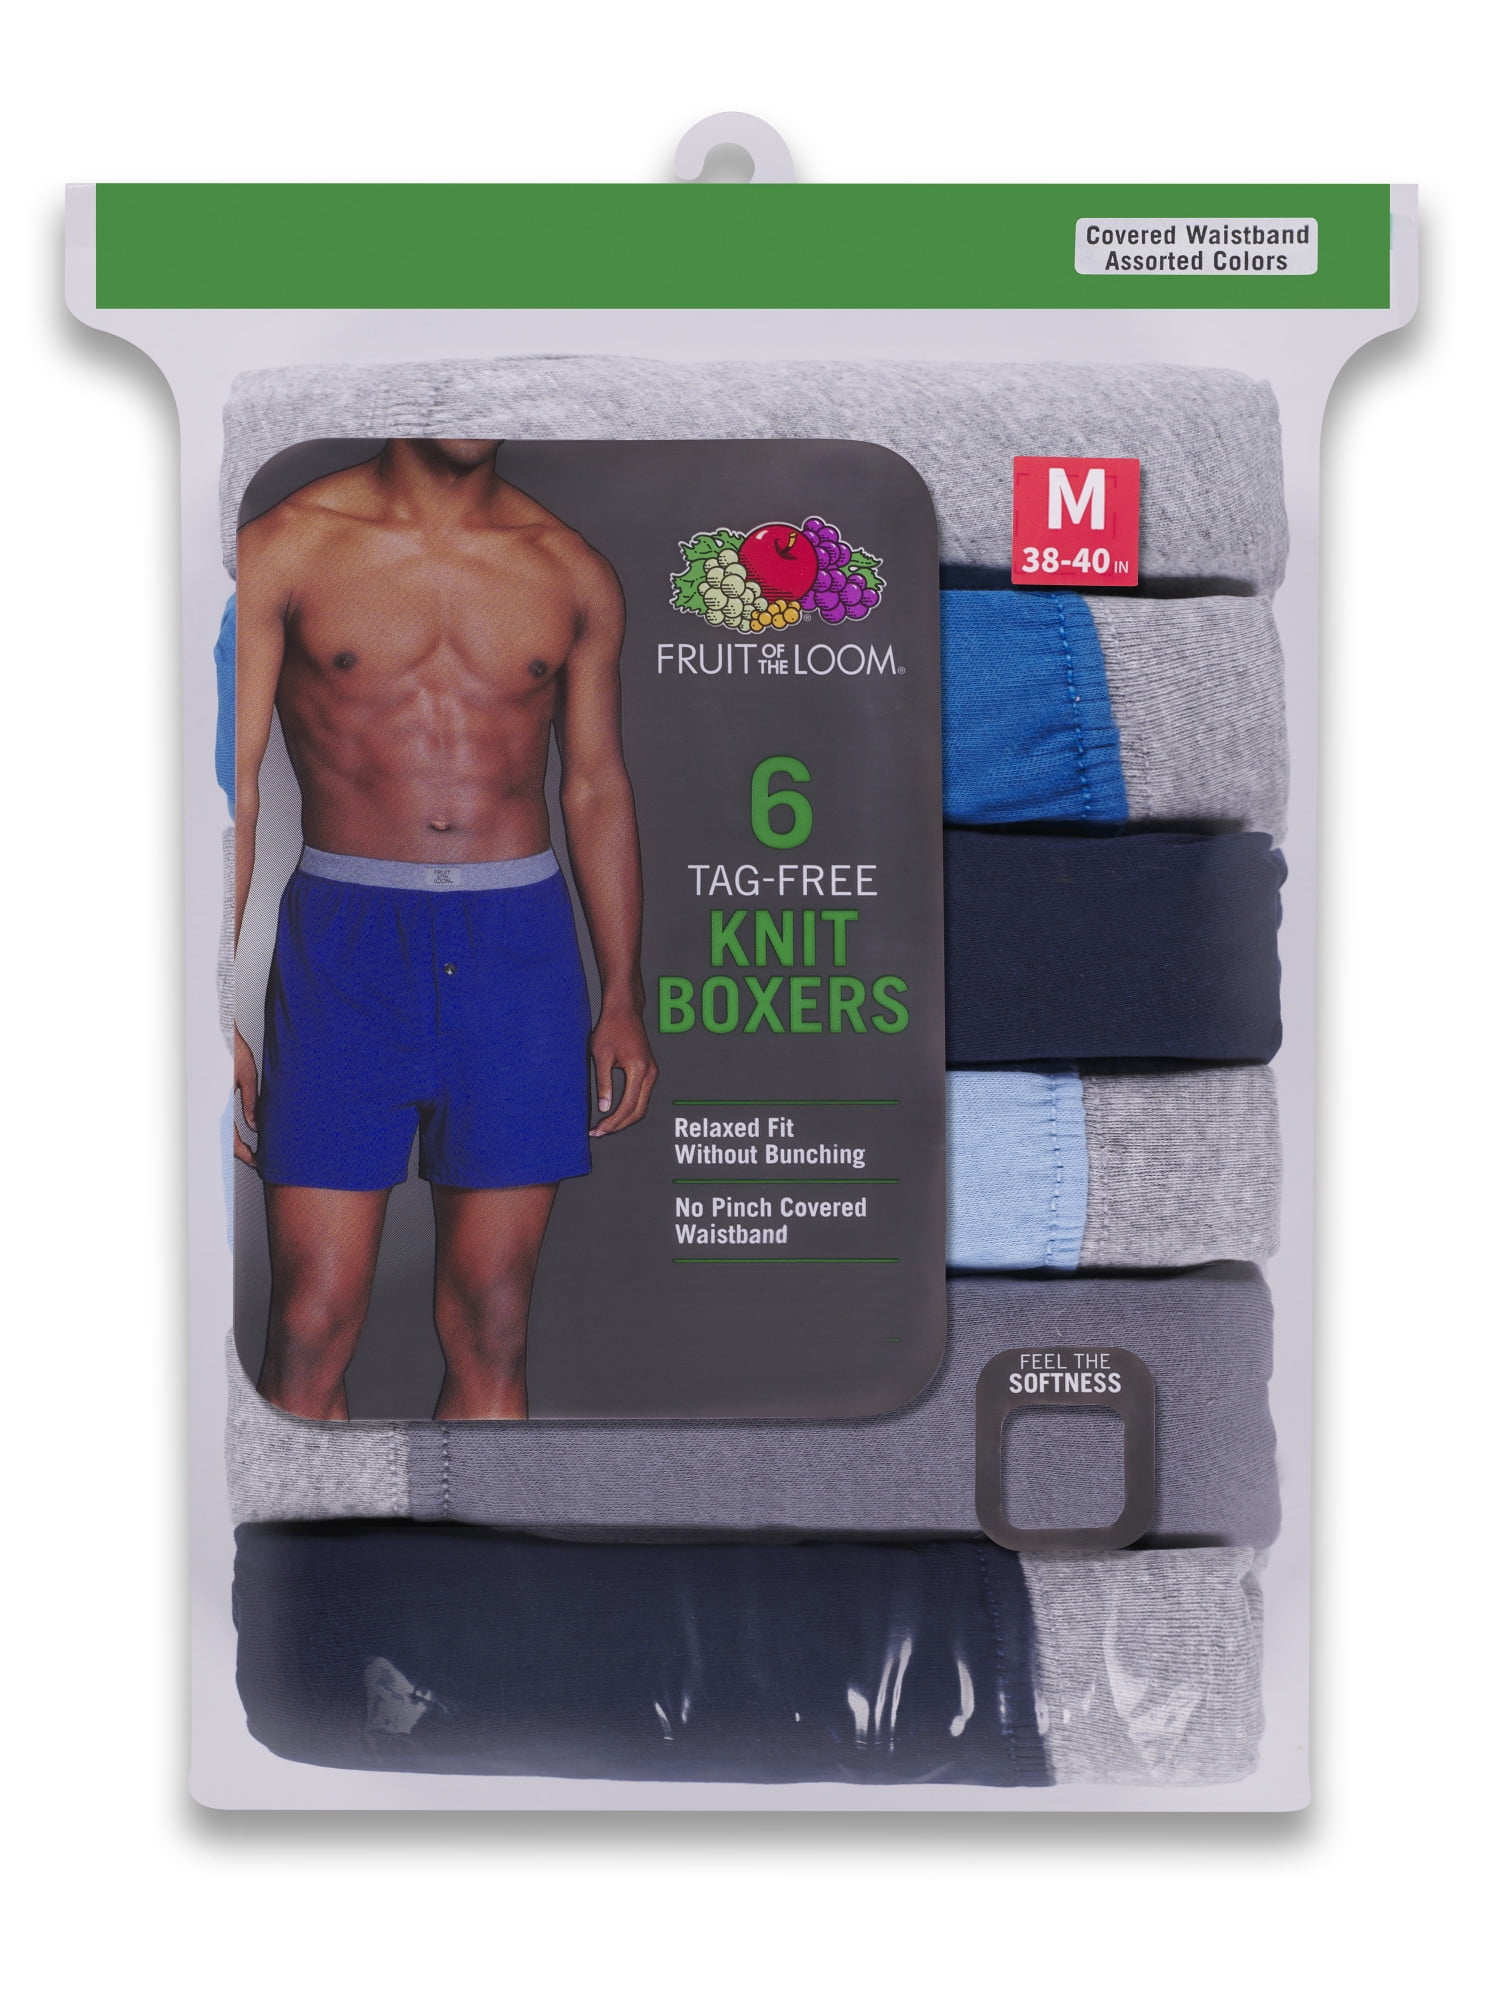 Buy Fruit of the Loom Men's Knit Boxers, 6 Pack, Sizes S-3XL Online at ...